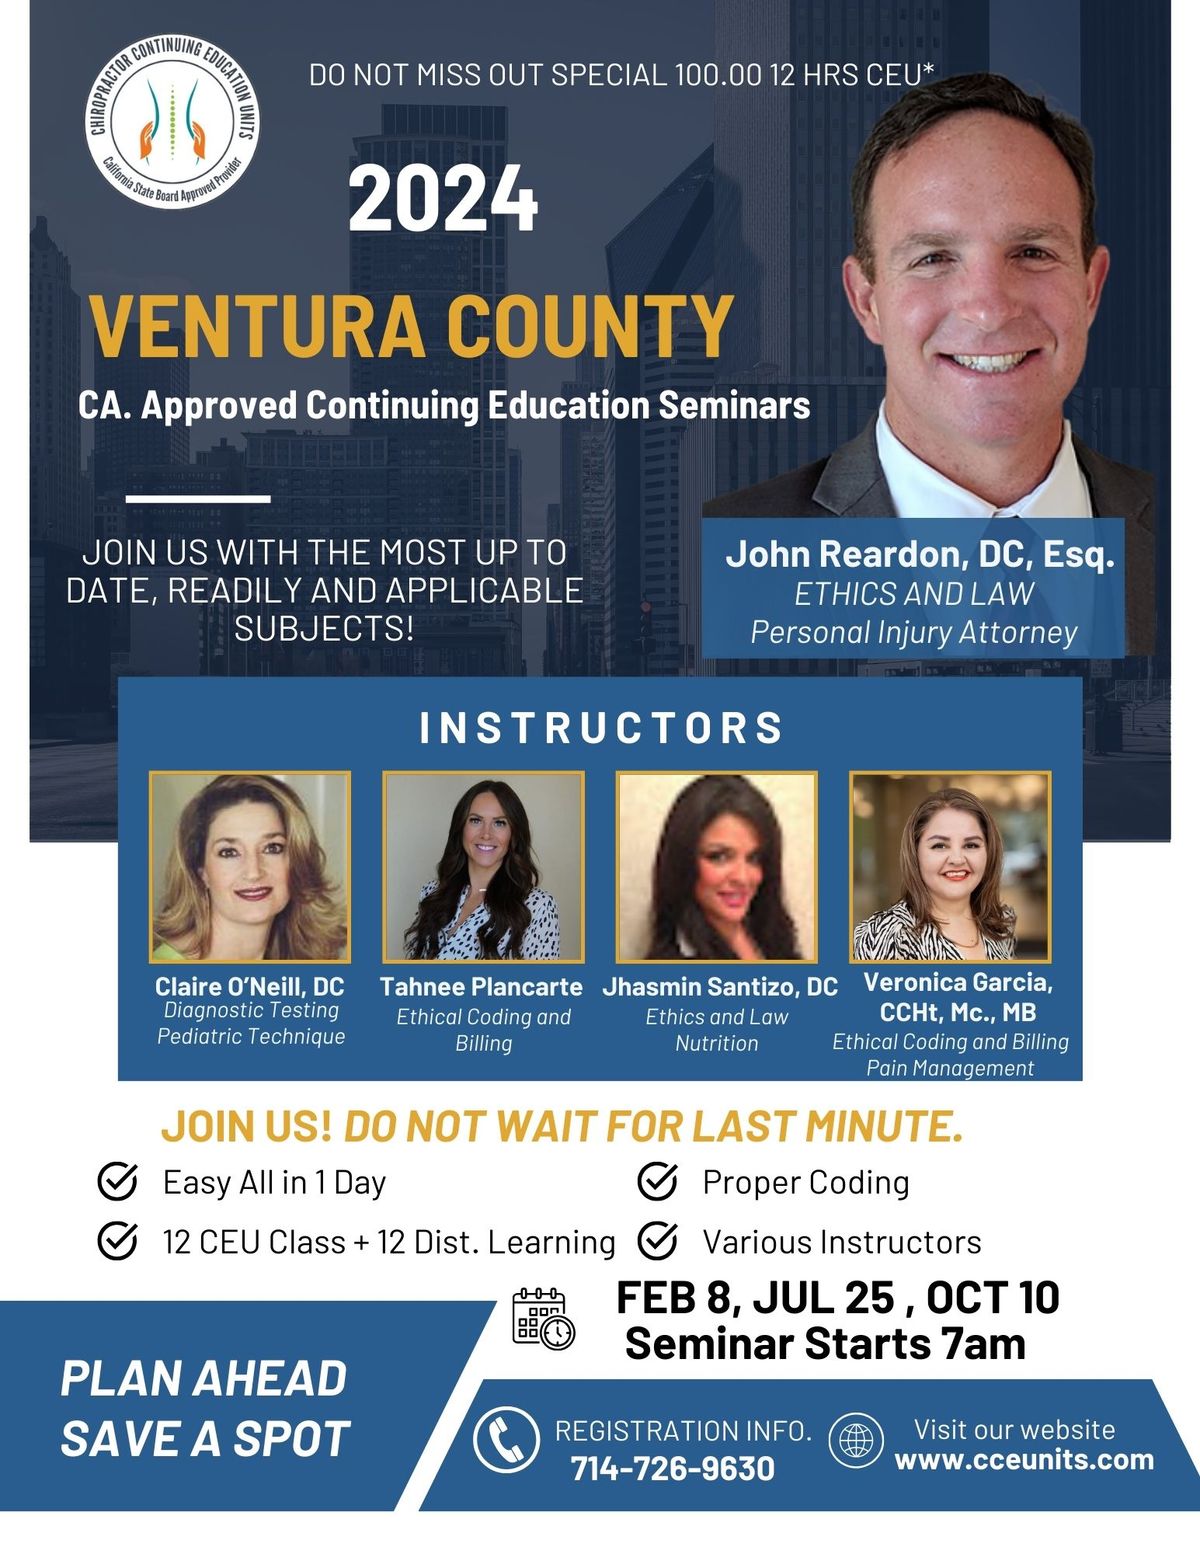 VENTURA COUNTY STATE BOARD APPROVED CONTINUING EDUCATION SEMINARS